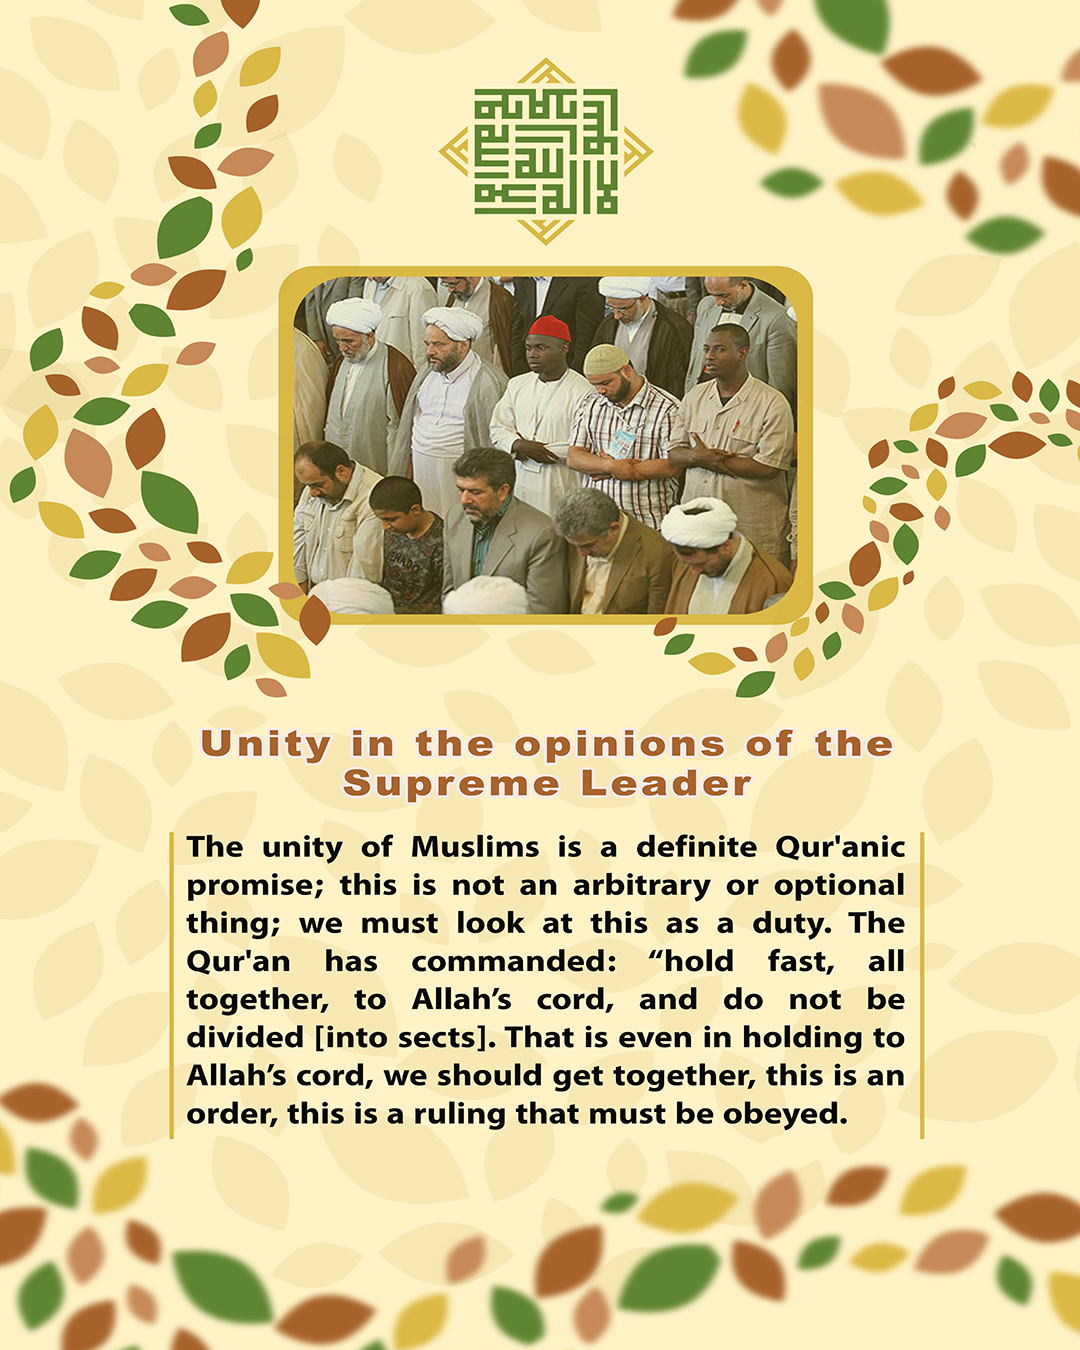 the unity of Muslims is a definite